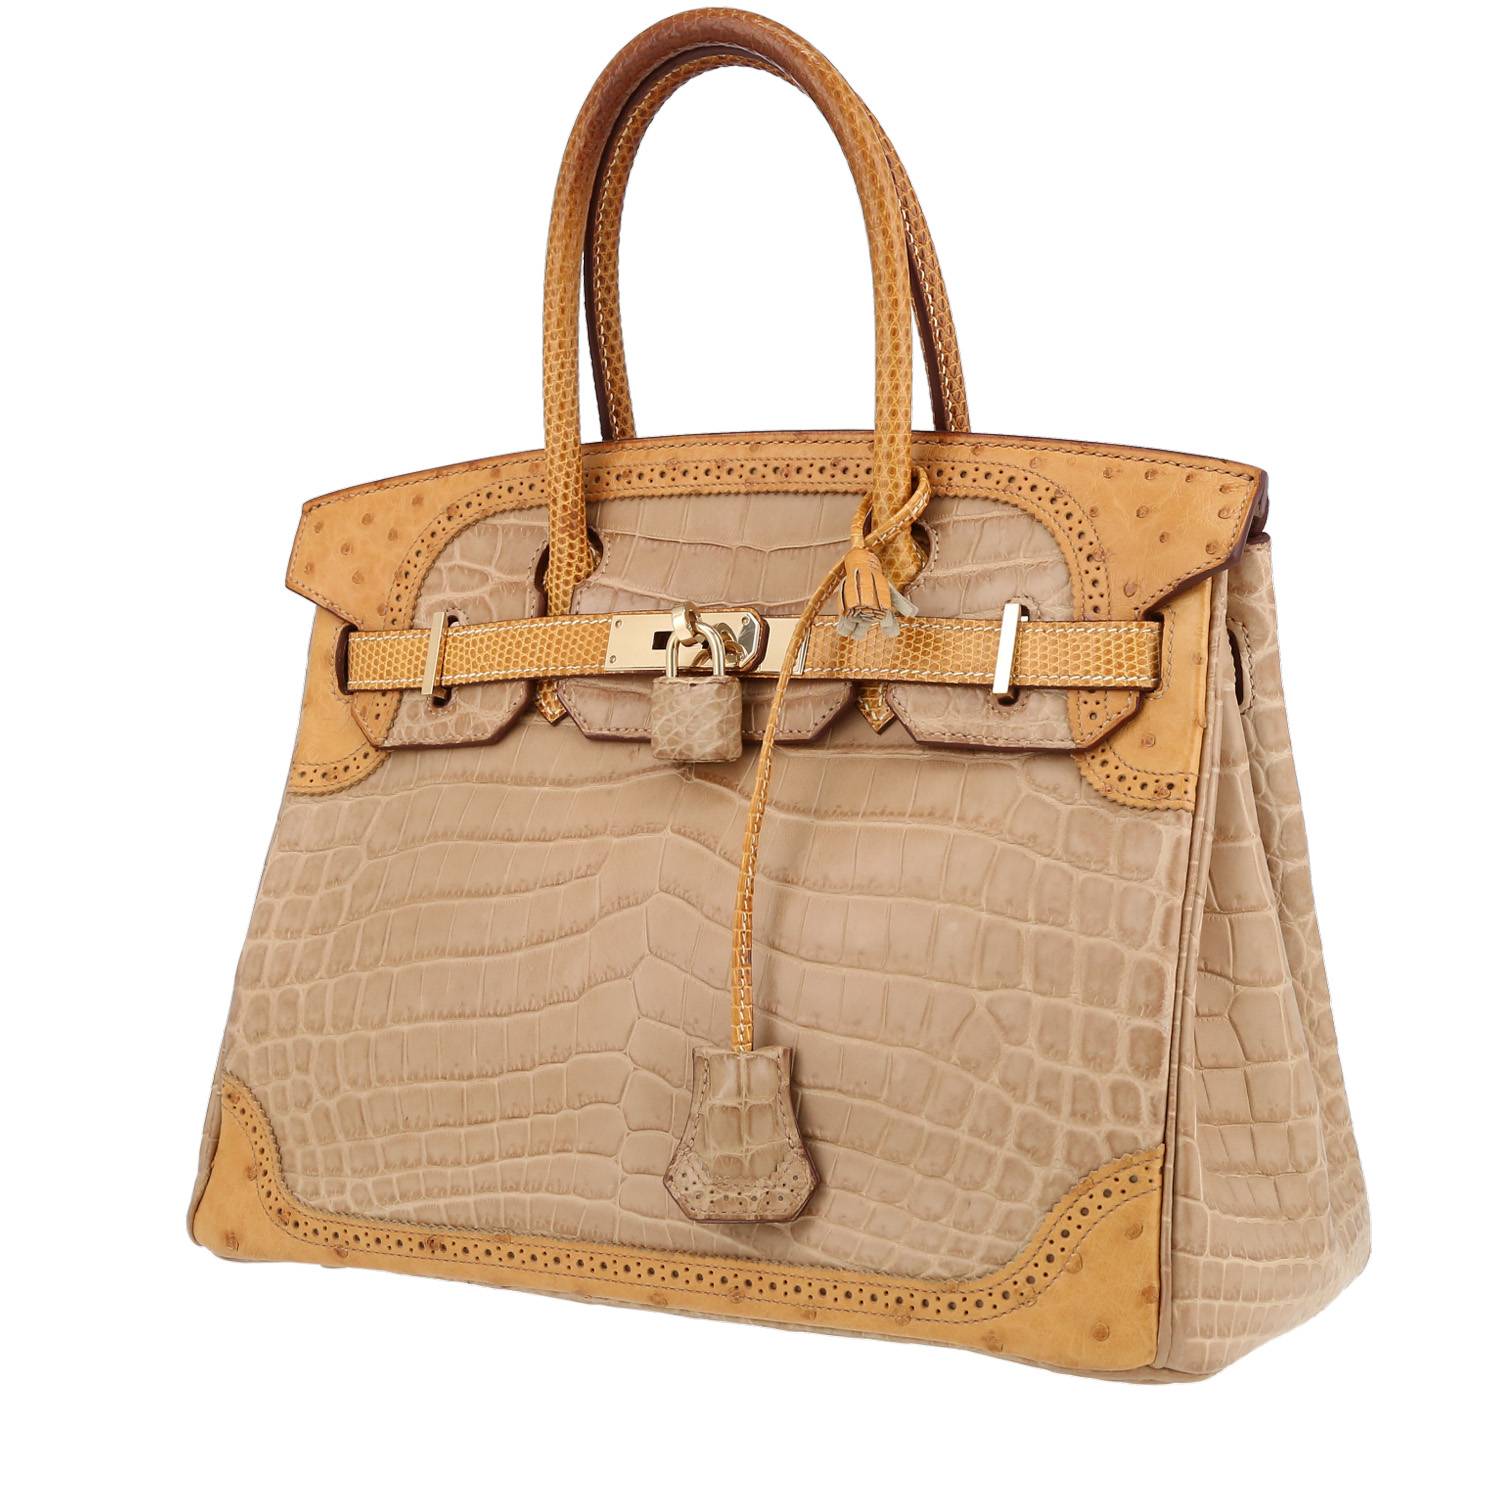 Hermès Birkin Ghillies handbag in Poussiere niloticus crocodile and brown ostrich leather - 00pp